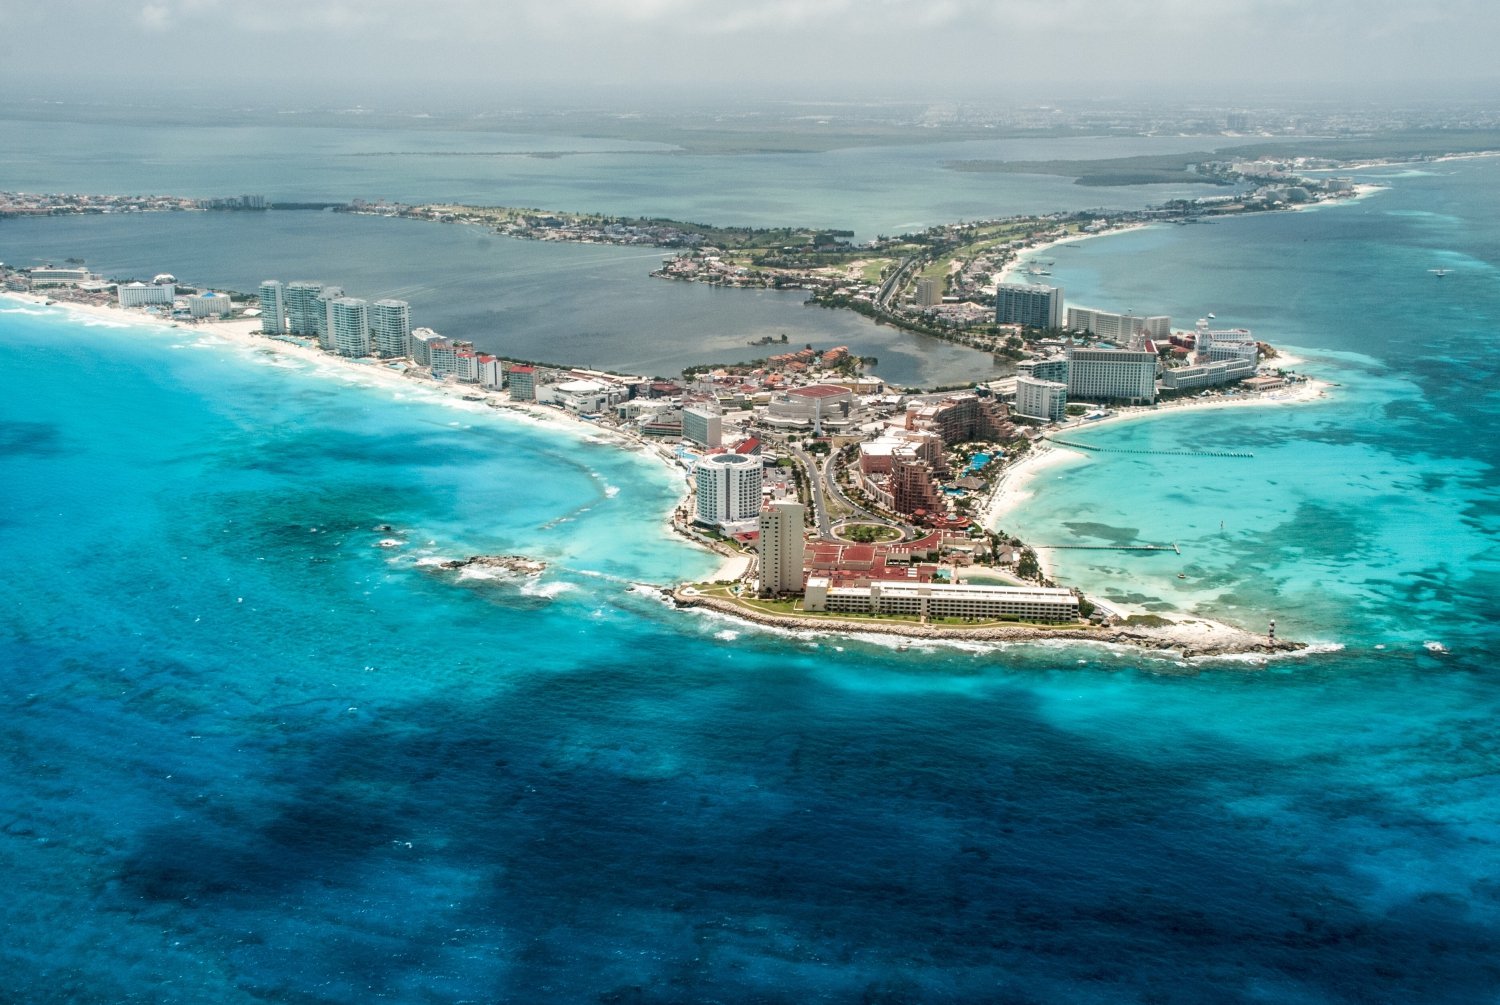 Top 5: best cheap (or free) things to do in Cancun